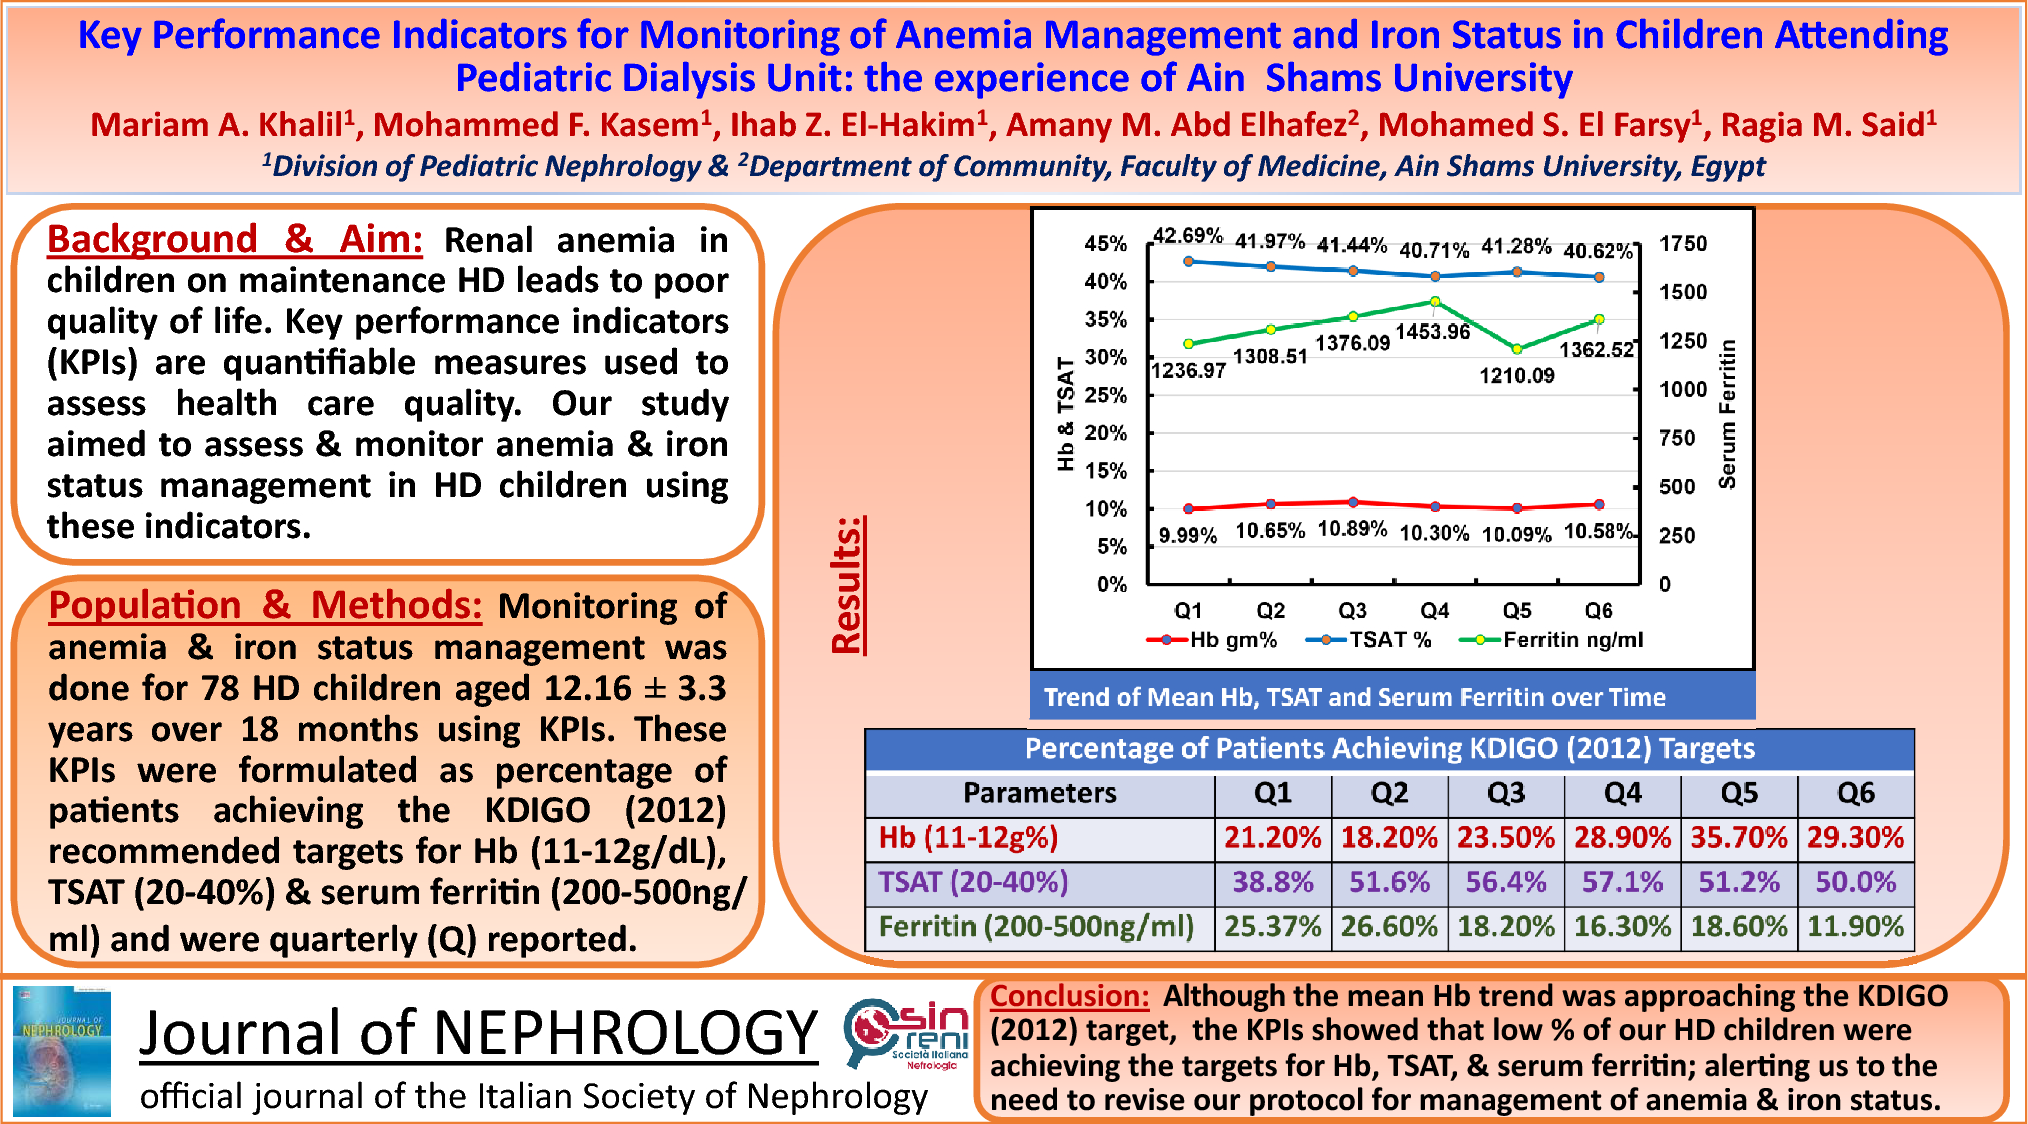 Key performance indicators for monitoring of anemia management and iron status in children attending a pediatric dialysis unit: the experience of Ain Shams University